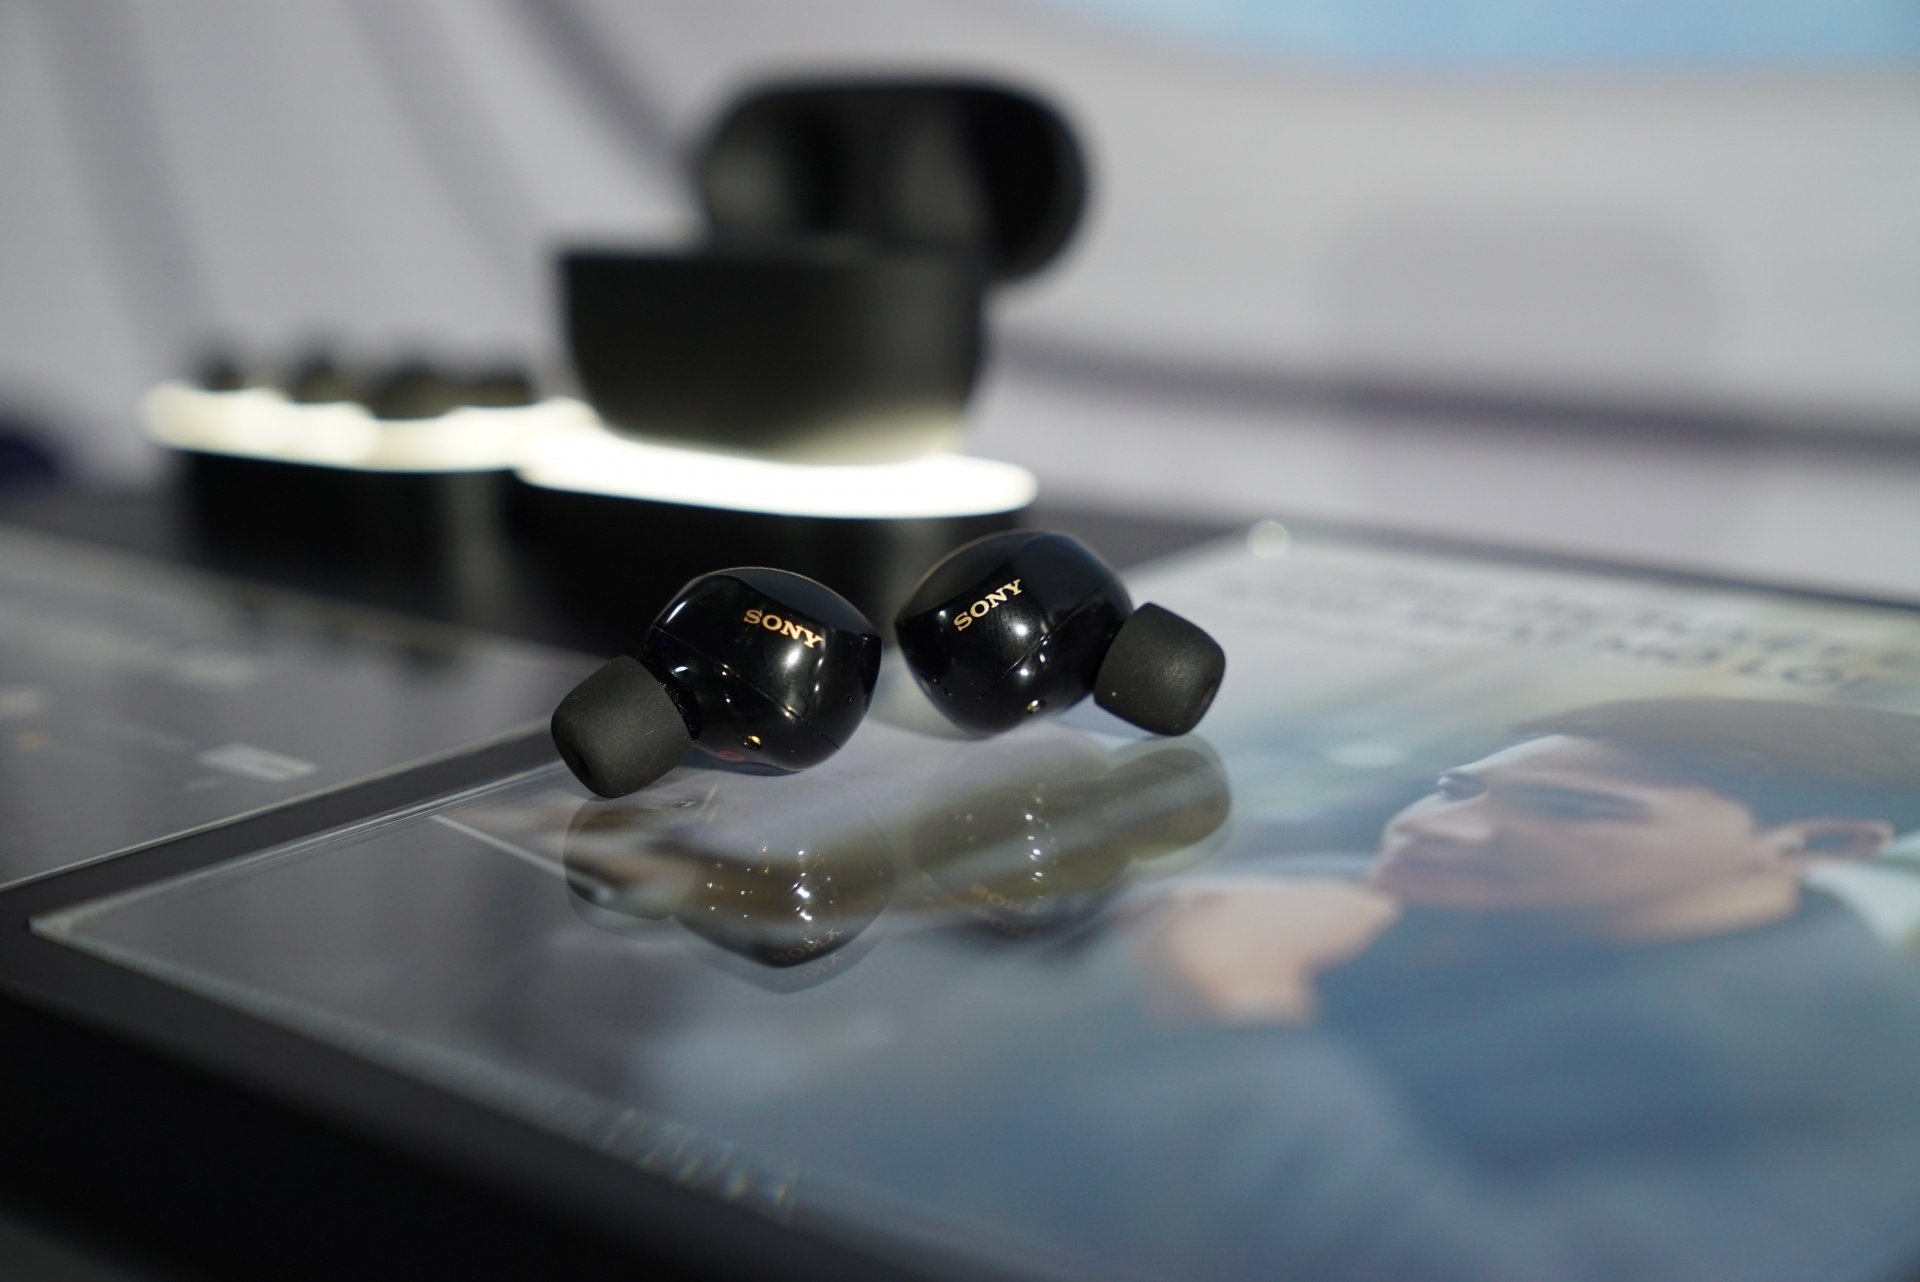 Sony launches new high-tech earbuds in Vietnam